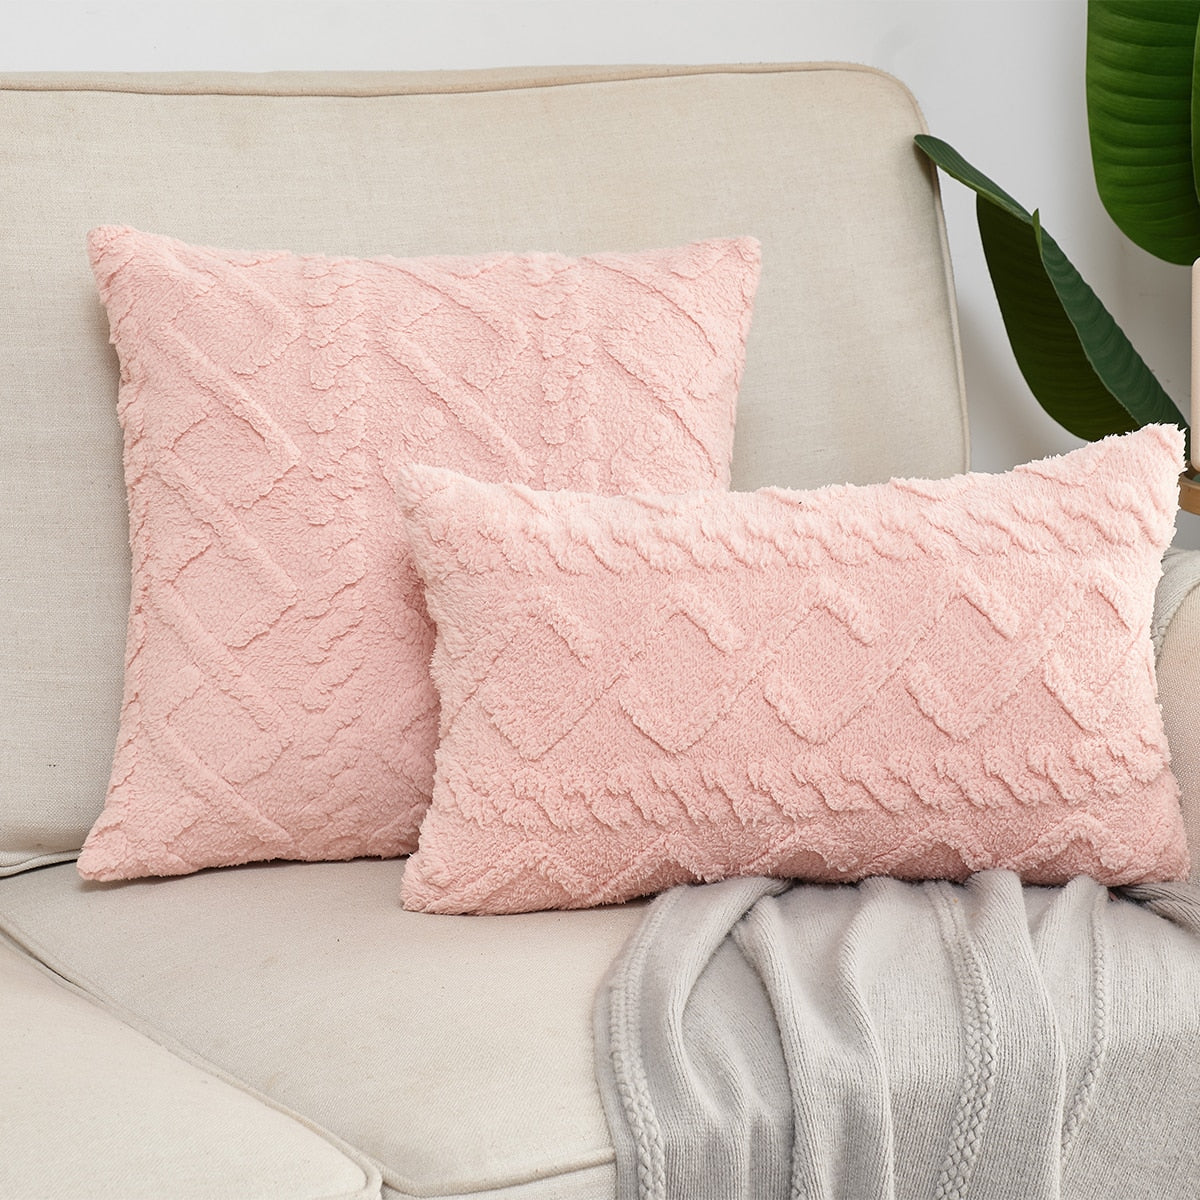 Pillowcase Decorative Home Pillows White Pink Retro Fluffy Soft Throw Pillowcover For Sofa Couch Cushion Cover 45x45 Pillow Hugs